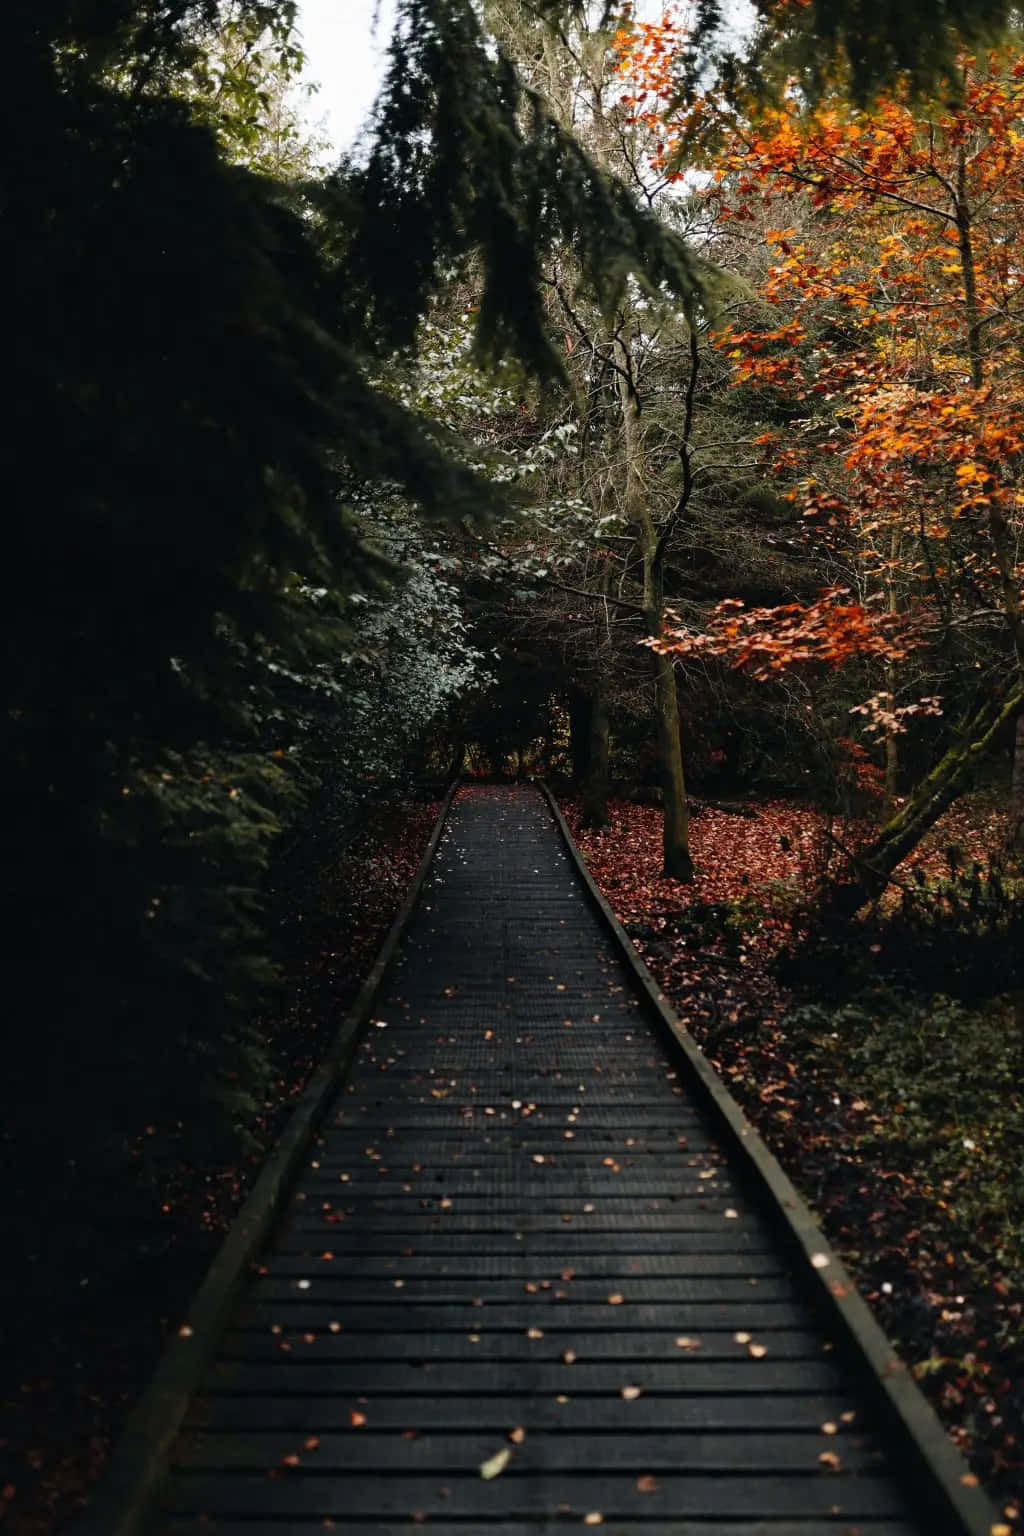 A Wooden Walkway In The Woods With Autumn Leaves